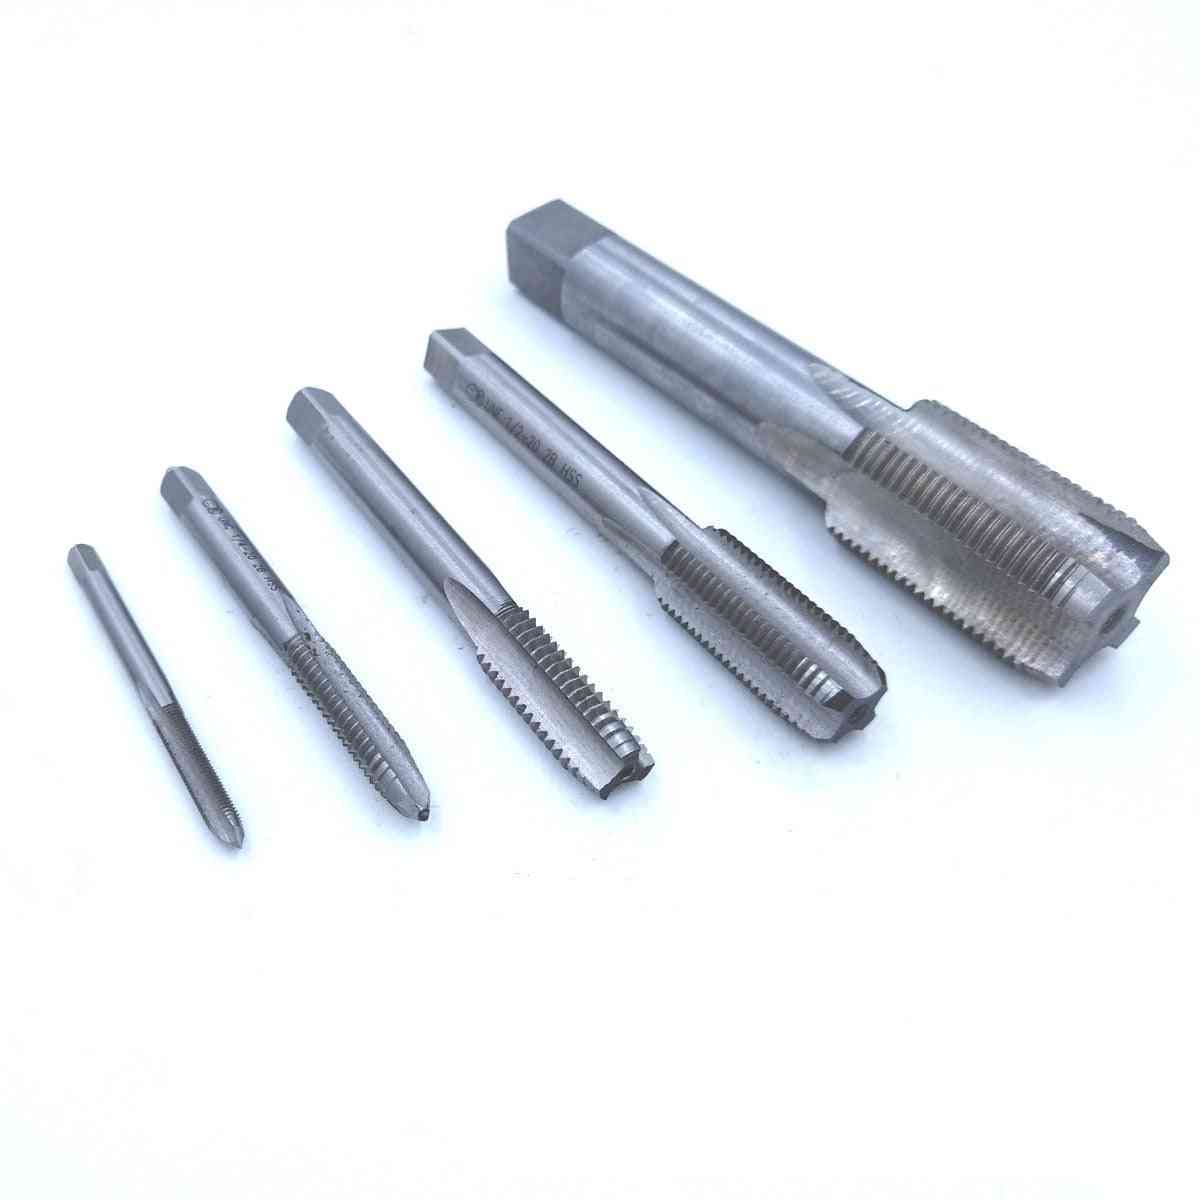 Metric Hss Left Hand Tap Pitch Threading Tools For Mold Machining Lh